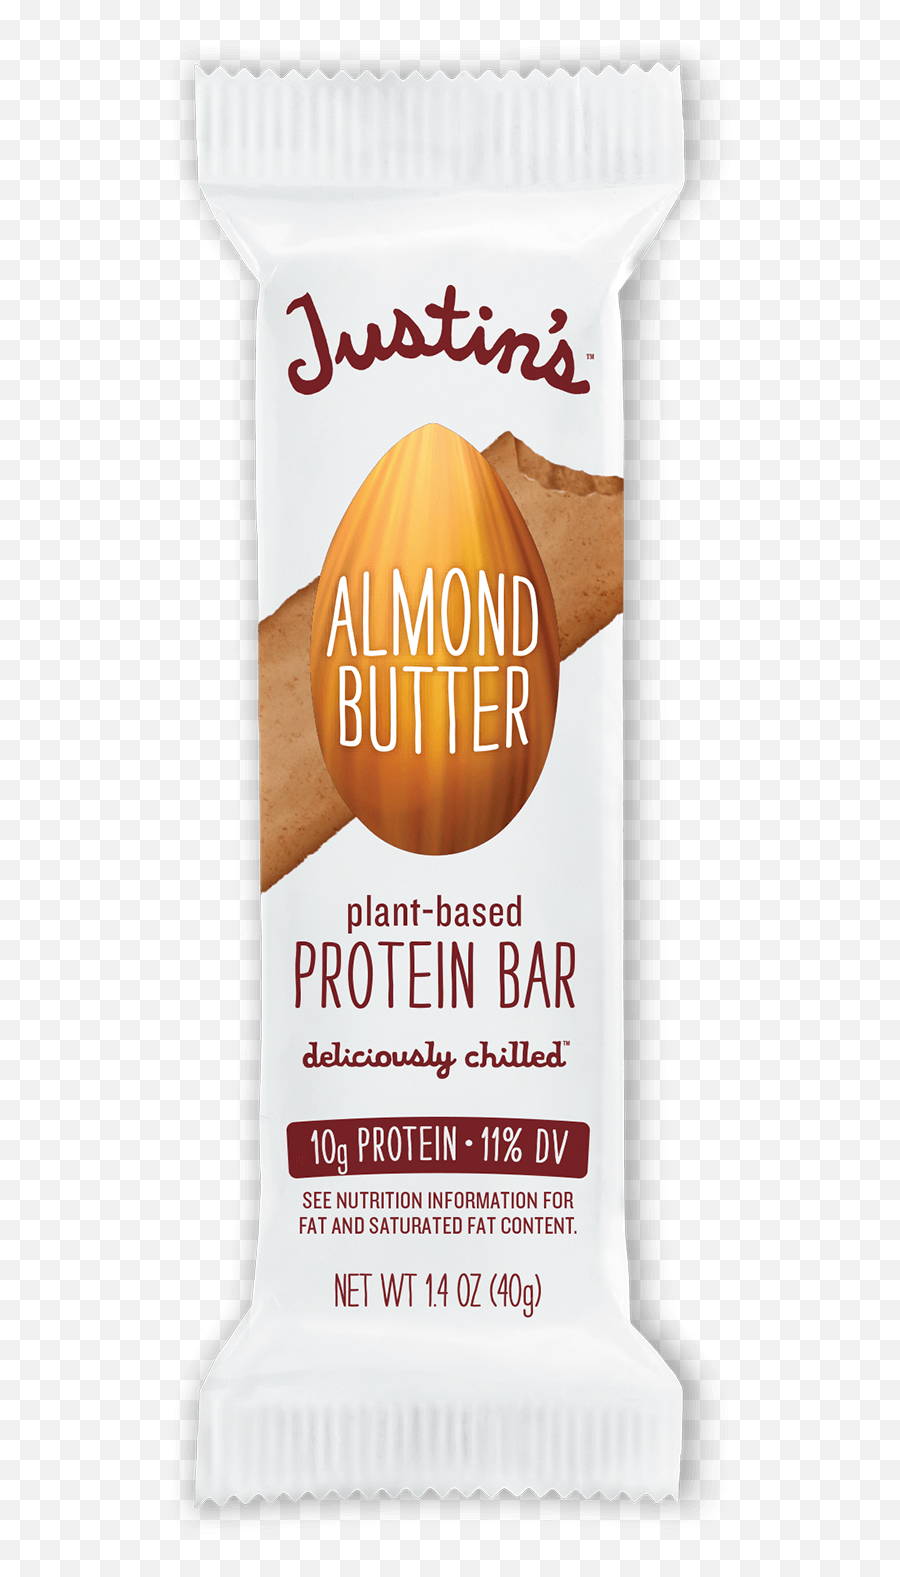 Almond Butter Protein Bar Justinu0027s Products - Almond Butter Bar Png,Iron Bar Icon